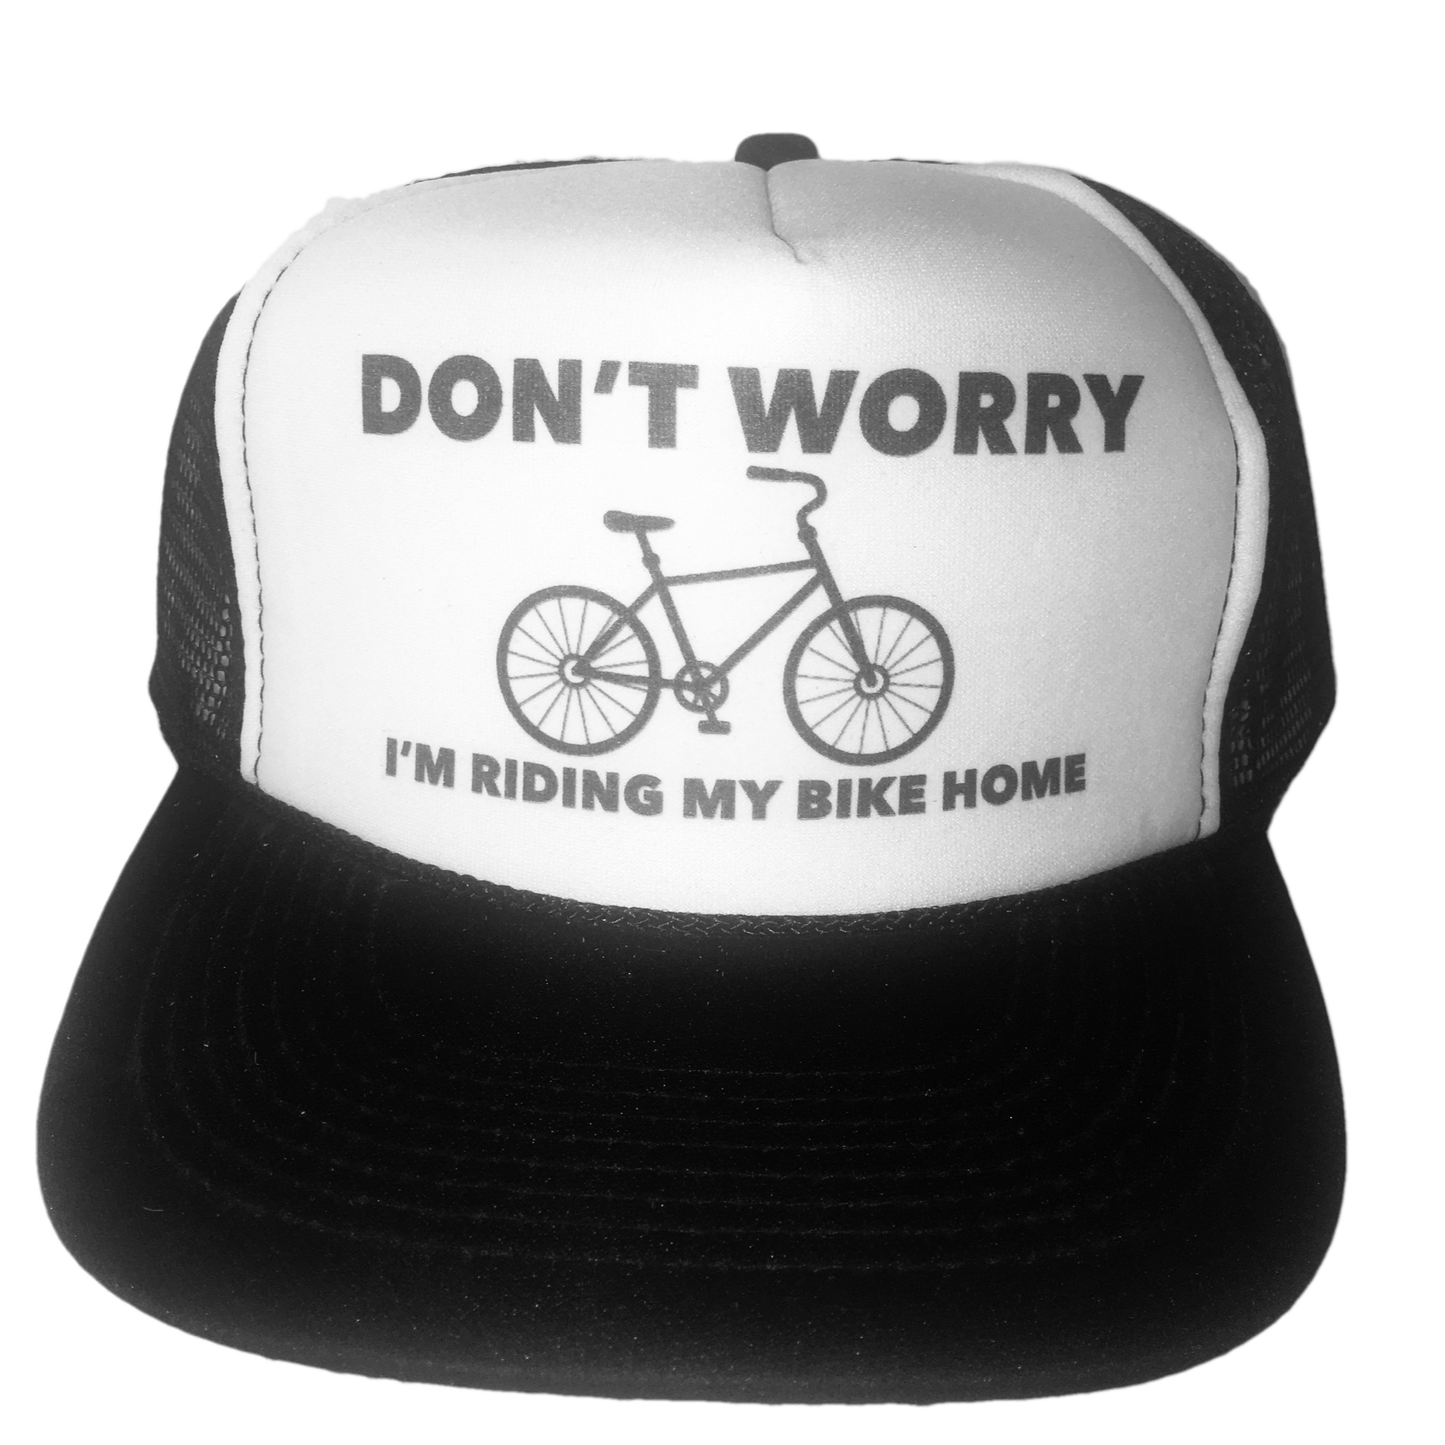 Don't Worry I'm Riding My Bike Home Trucker Hat